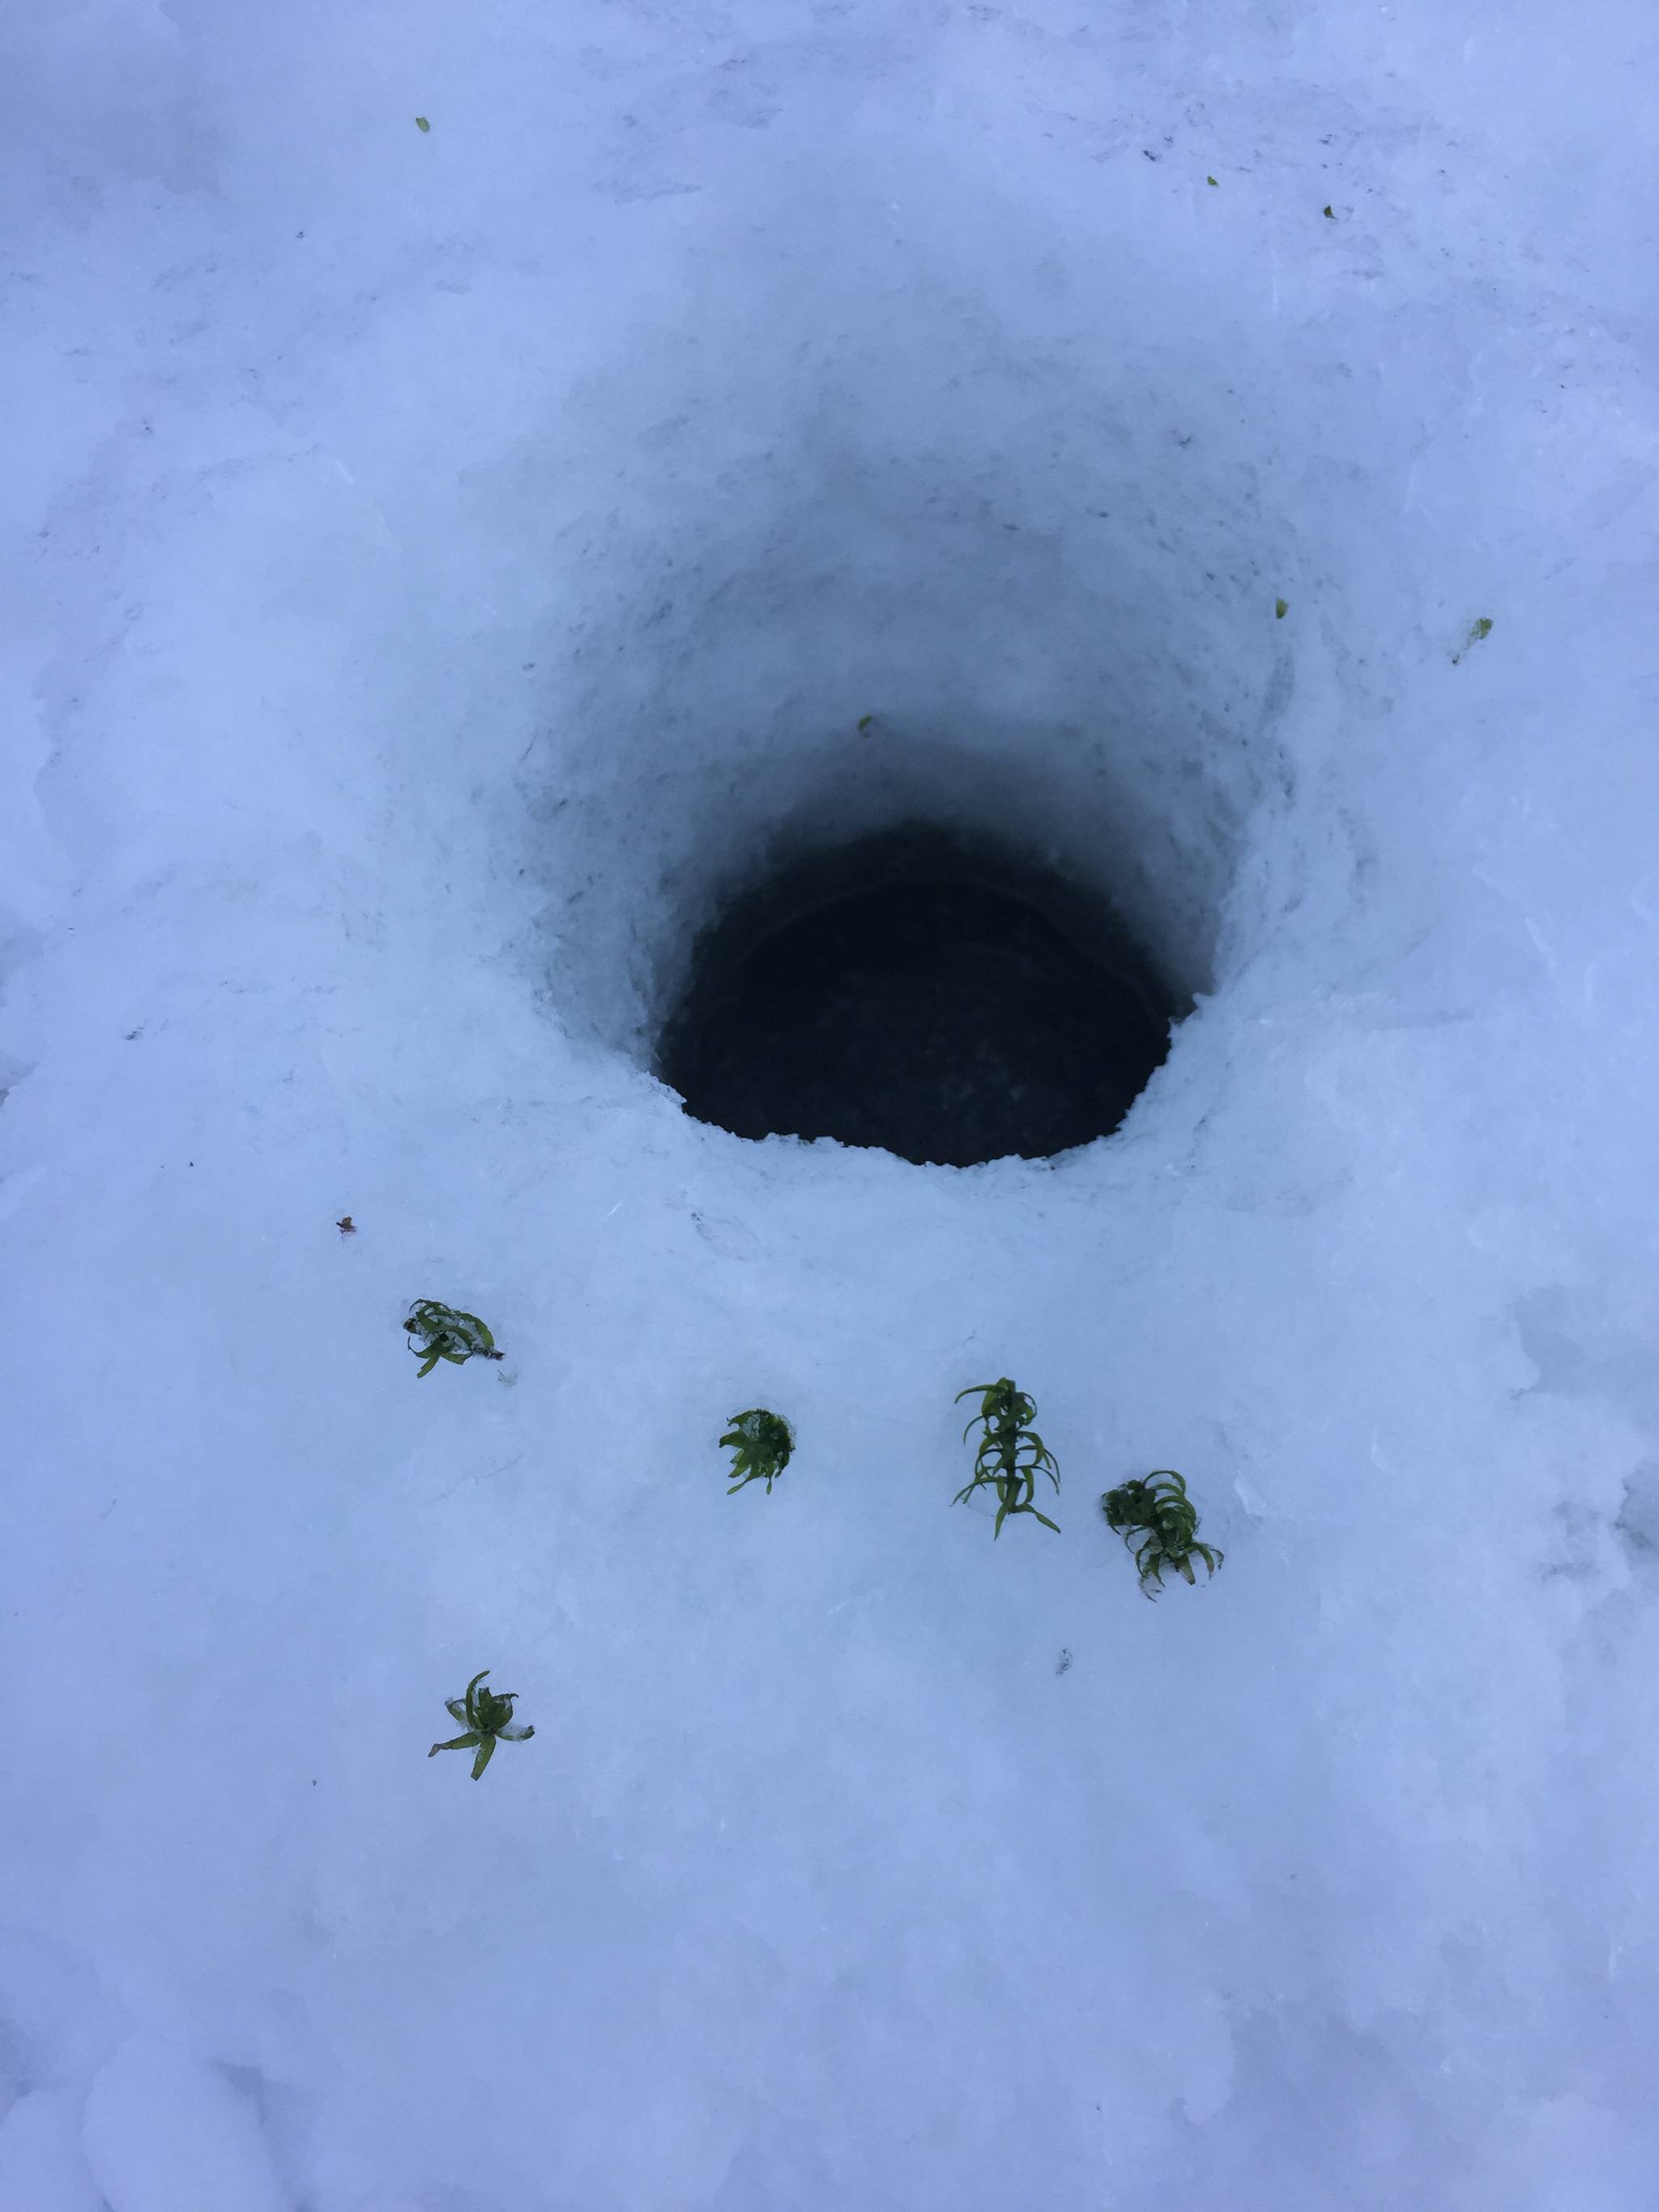 Fragments of the invasive water weed elodea lay in the snow beside an auger hole drilled on Sport Lake in February 2017 in Soldotna, Alaska. Alaska Department of Fish and Game biologists found a small amount of elodea when drilling auger holes in preparation for an ice fishing event for the Kenai Peninsula Borough School District. (Photo courtesy Rob Massengill/Alaska Department of Fish and Game)